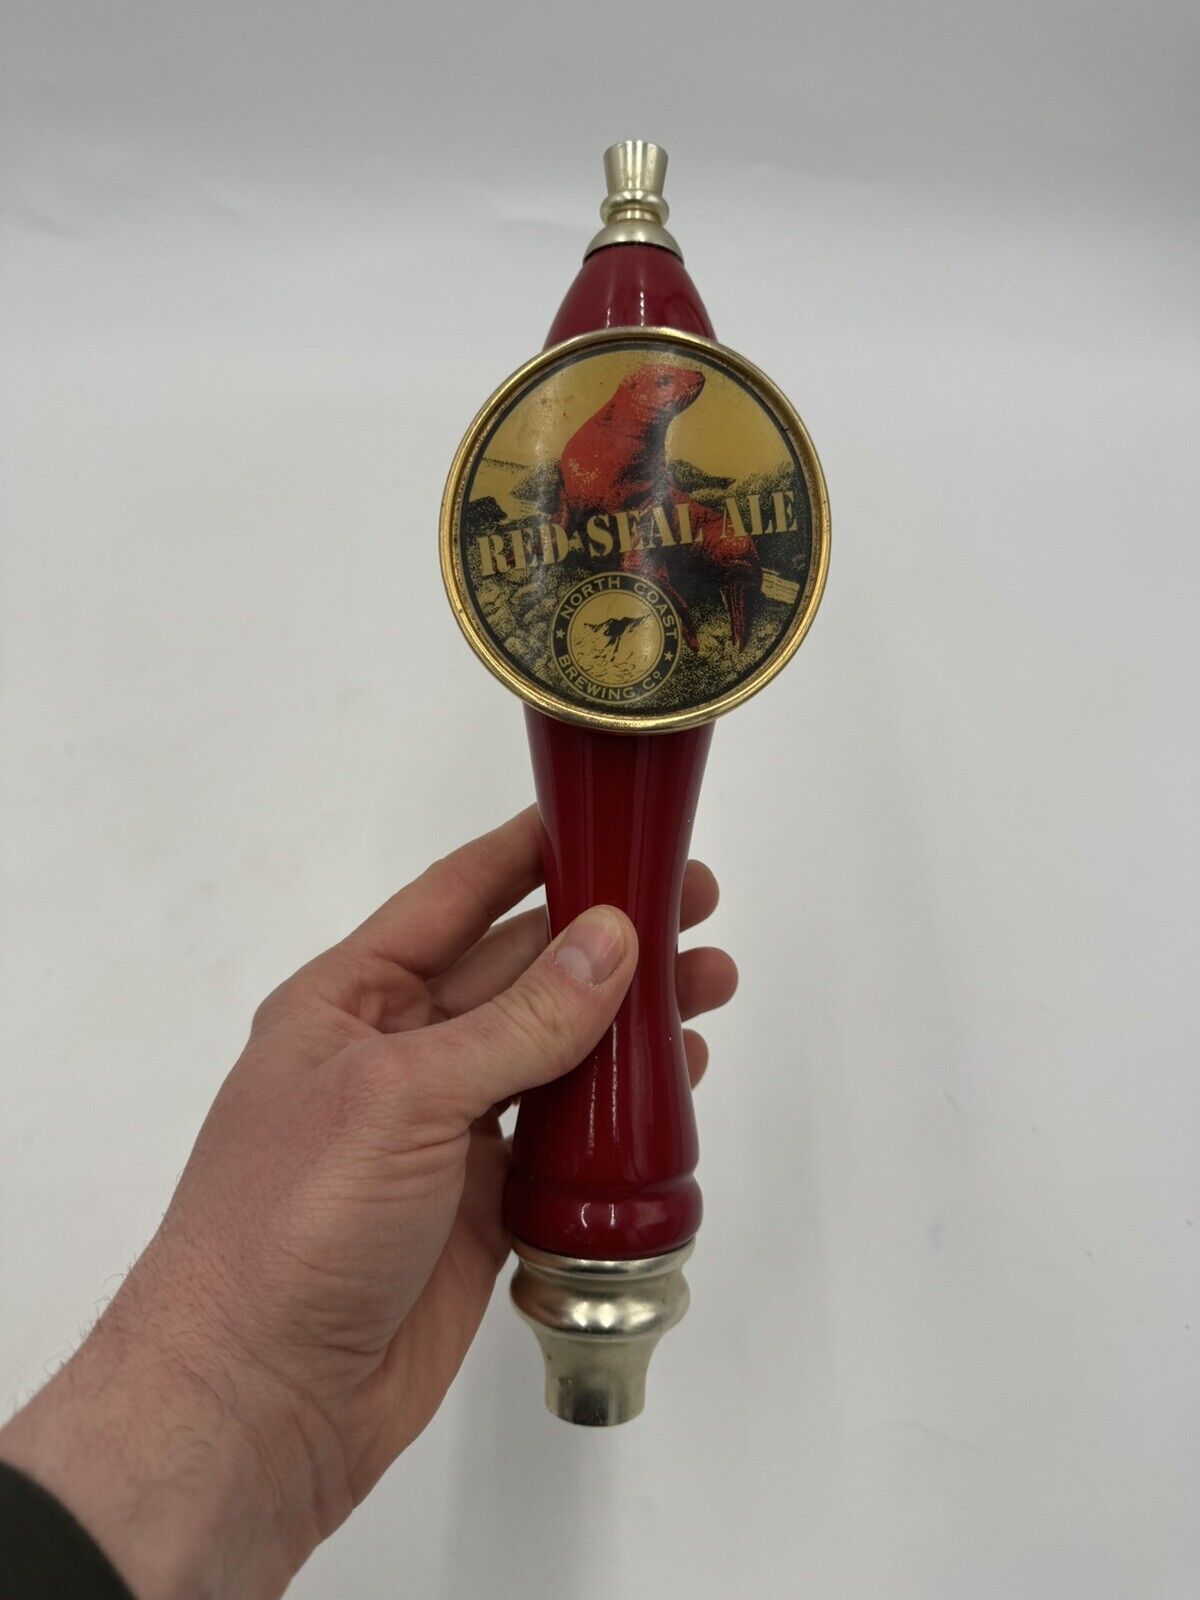 VTG Red Seal Ale Tap Handle North Coast Brewery CA Rare Red Handle